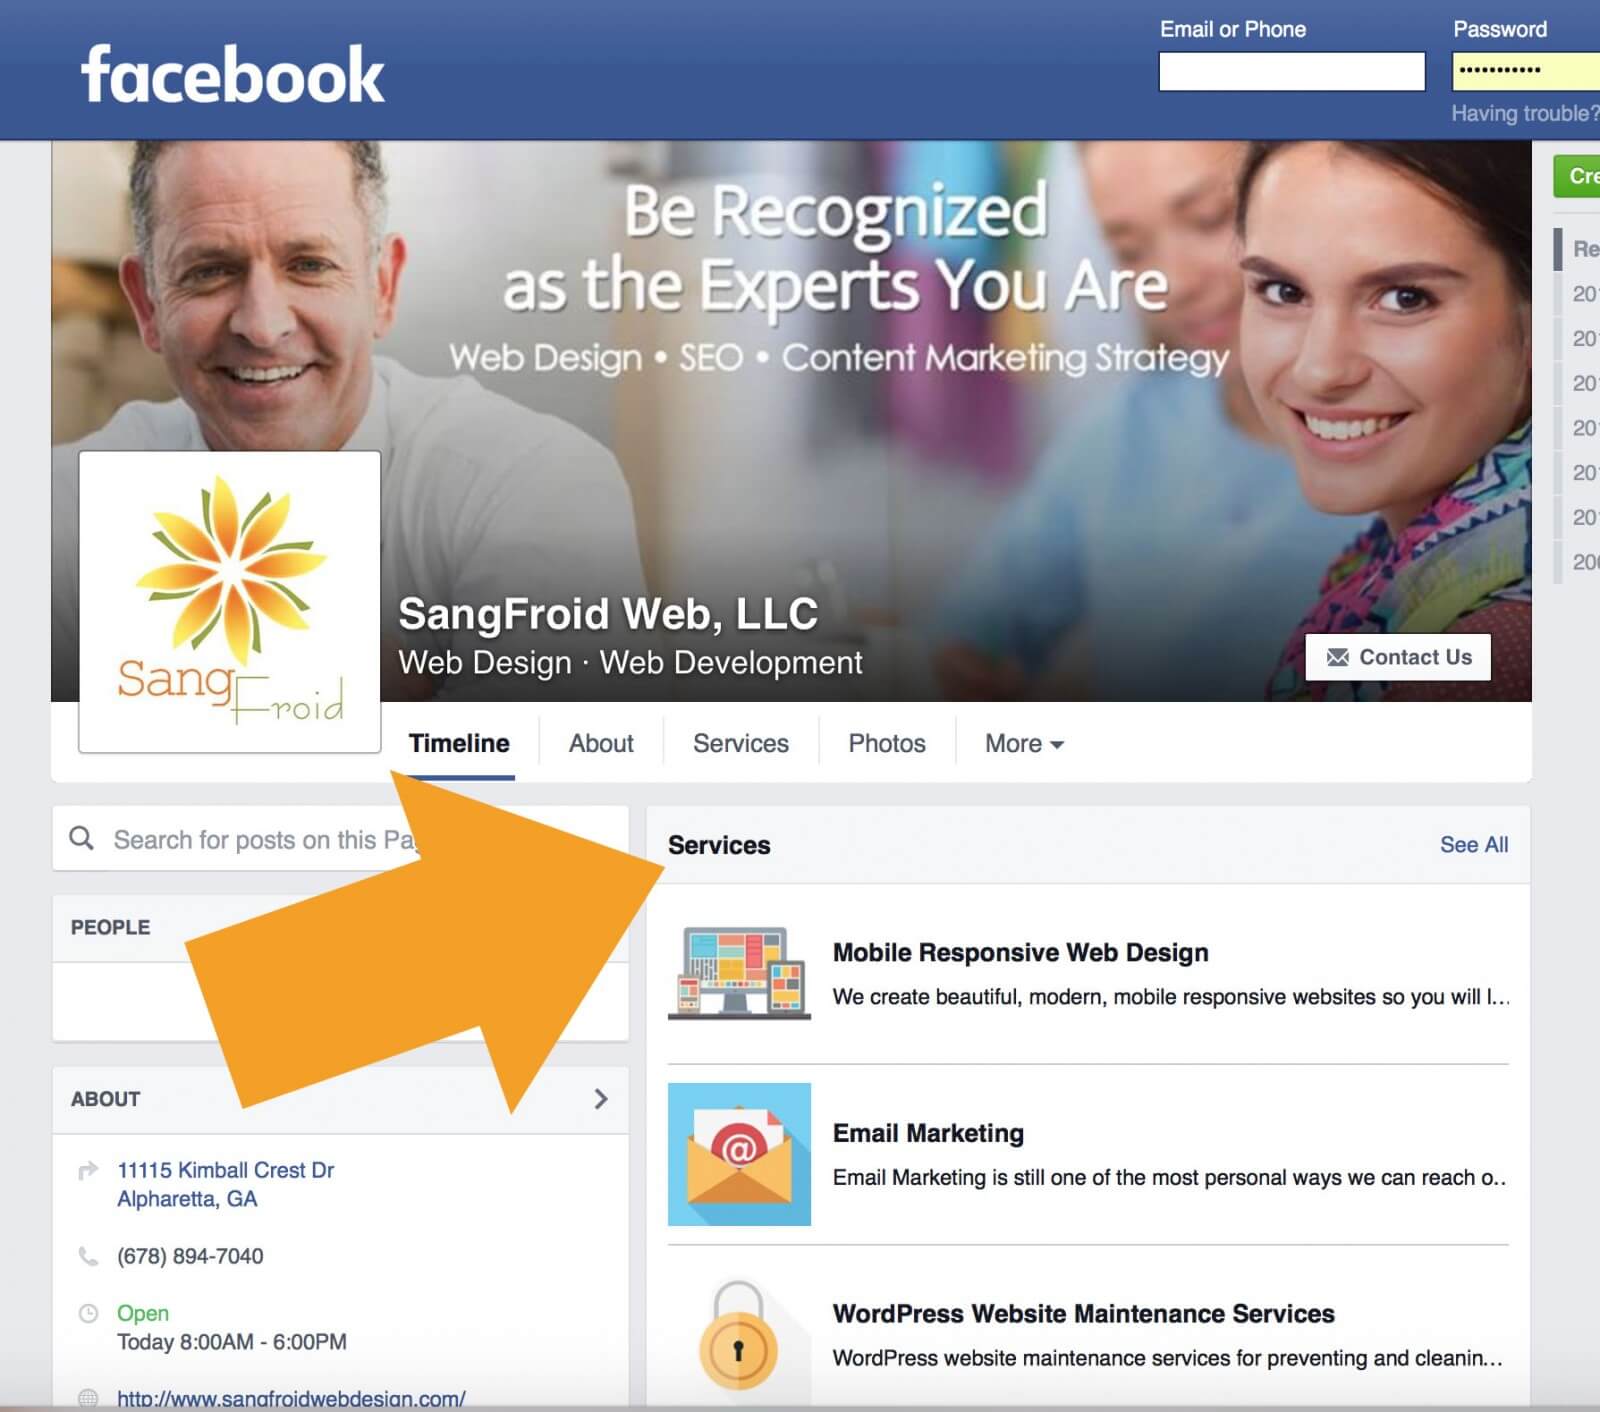 facebook-services-tab-list-top-of-news-feed